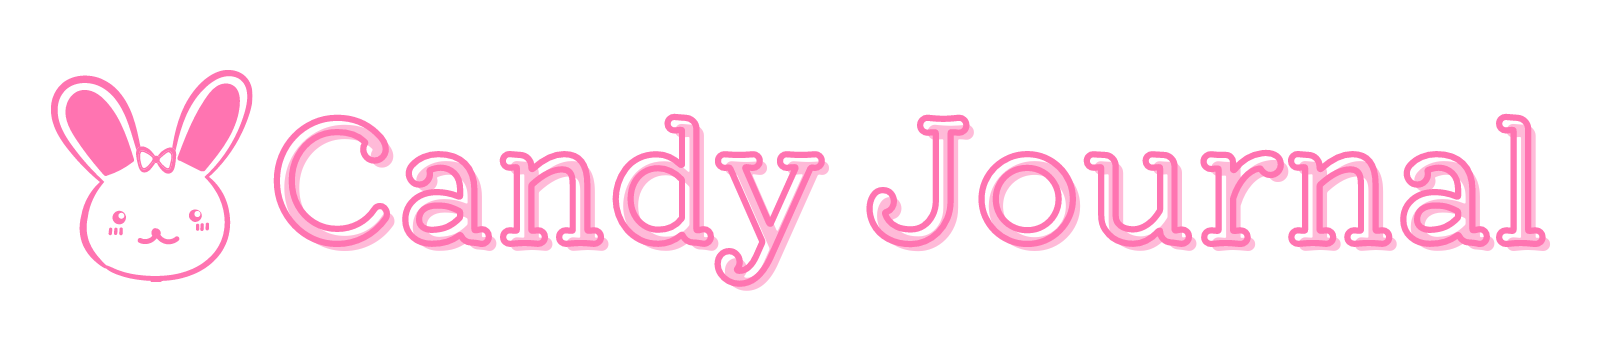 Candy Journal